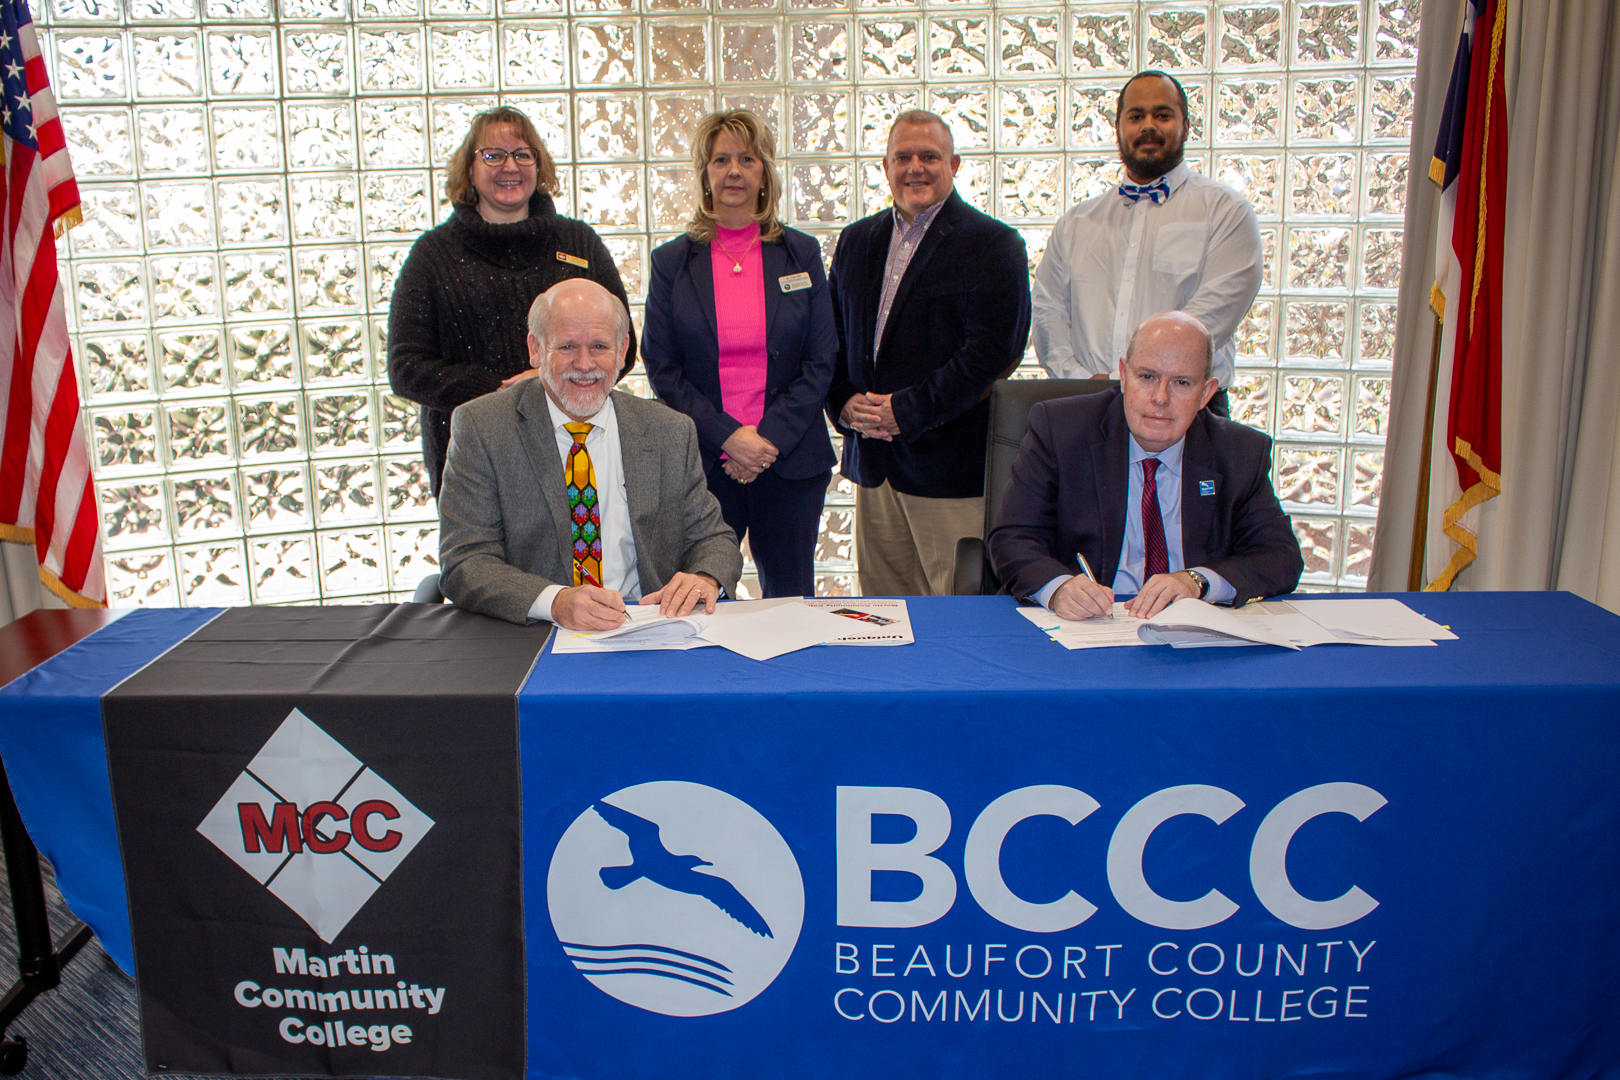 2 people signing documents and 4 people looking banners say martin county community college beaufort county community college